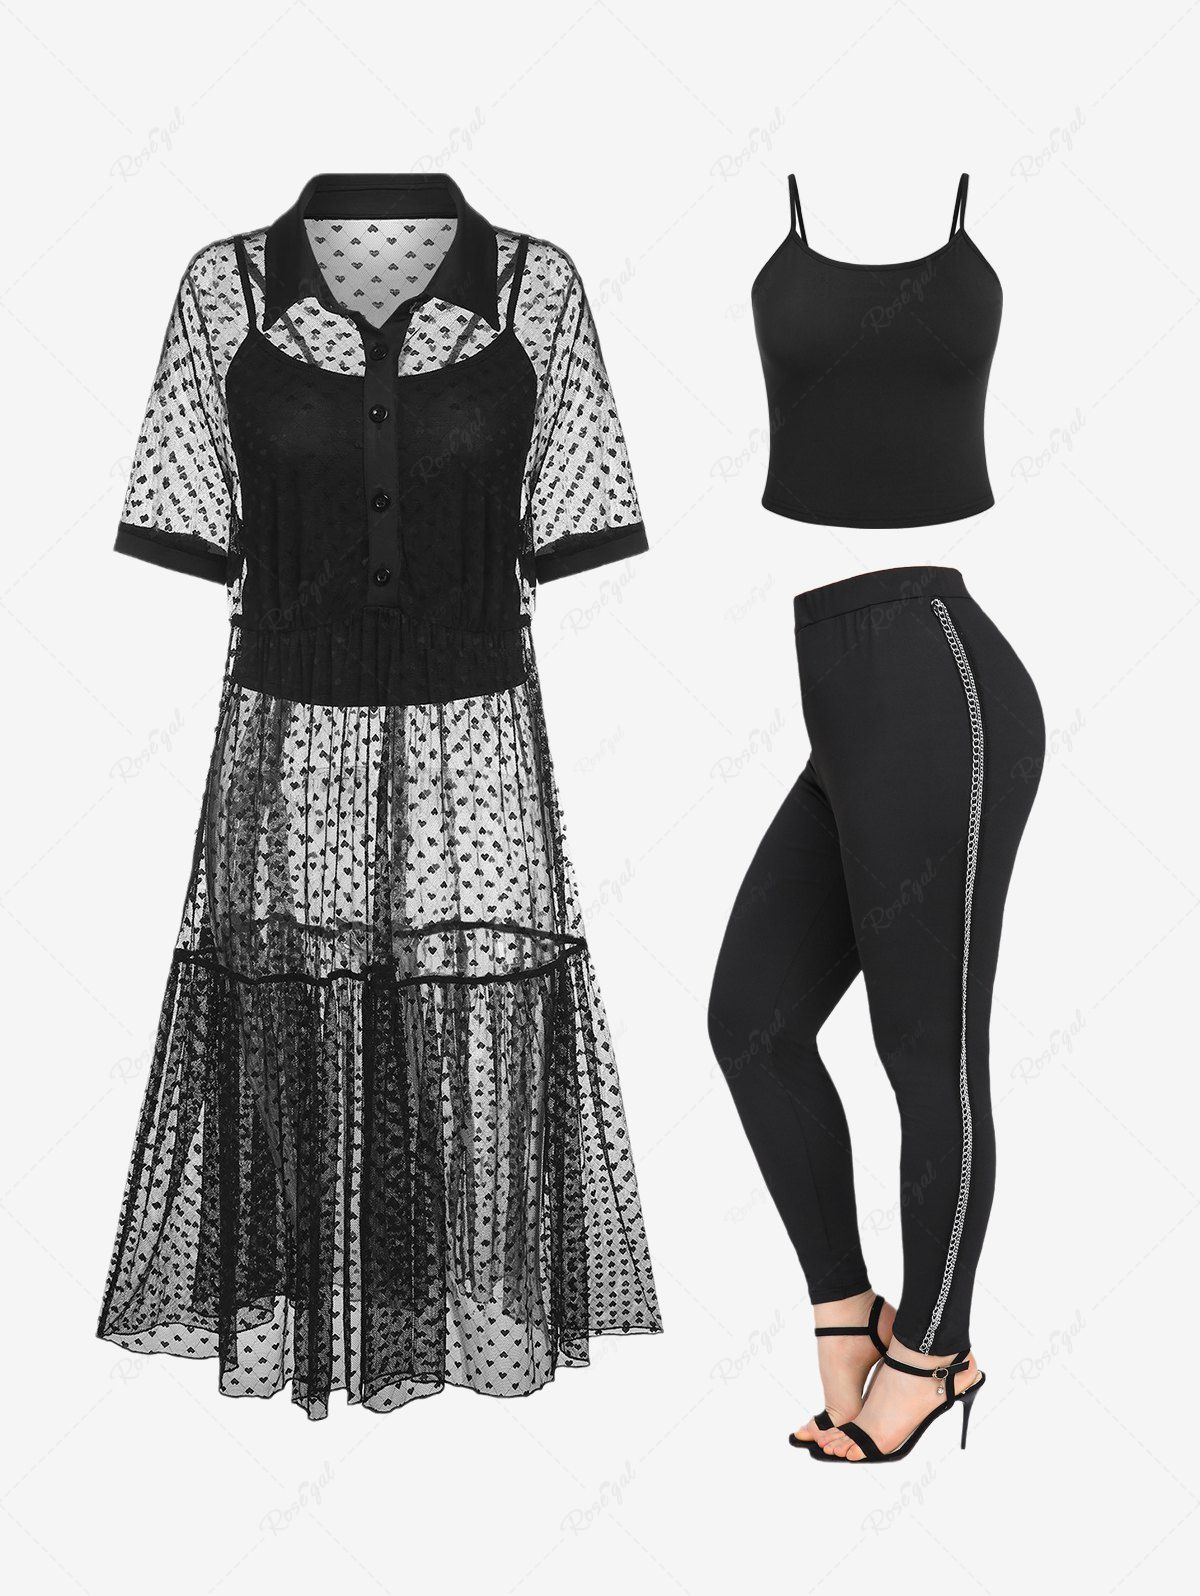 Store Heart Pattern Sheer Mesh Longline Blouse with Camisole Twinset and Chains Pants Plus Size Fall Outfit  